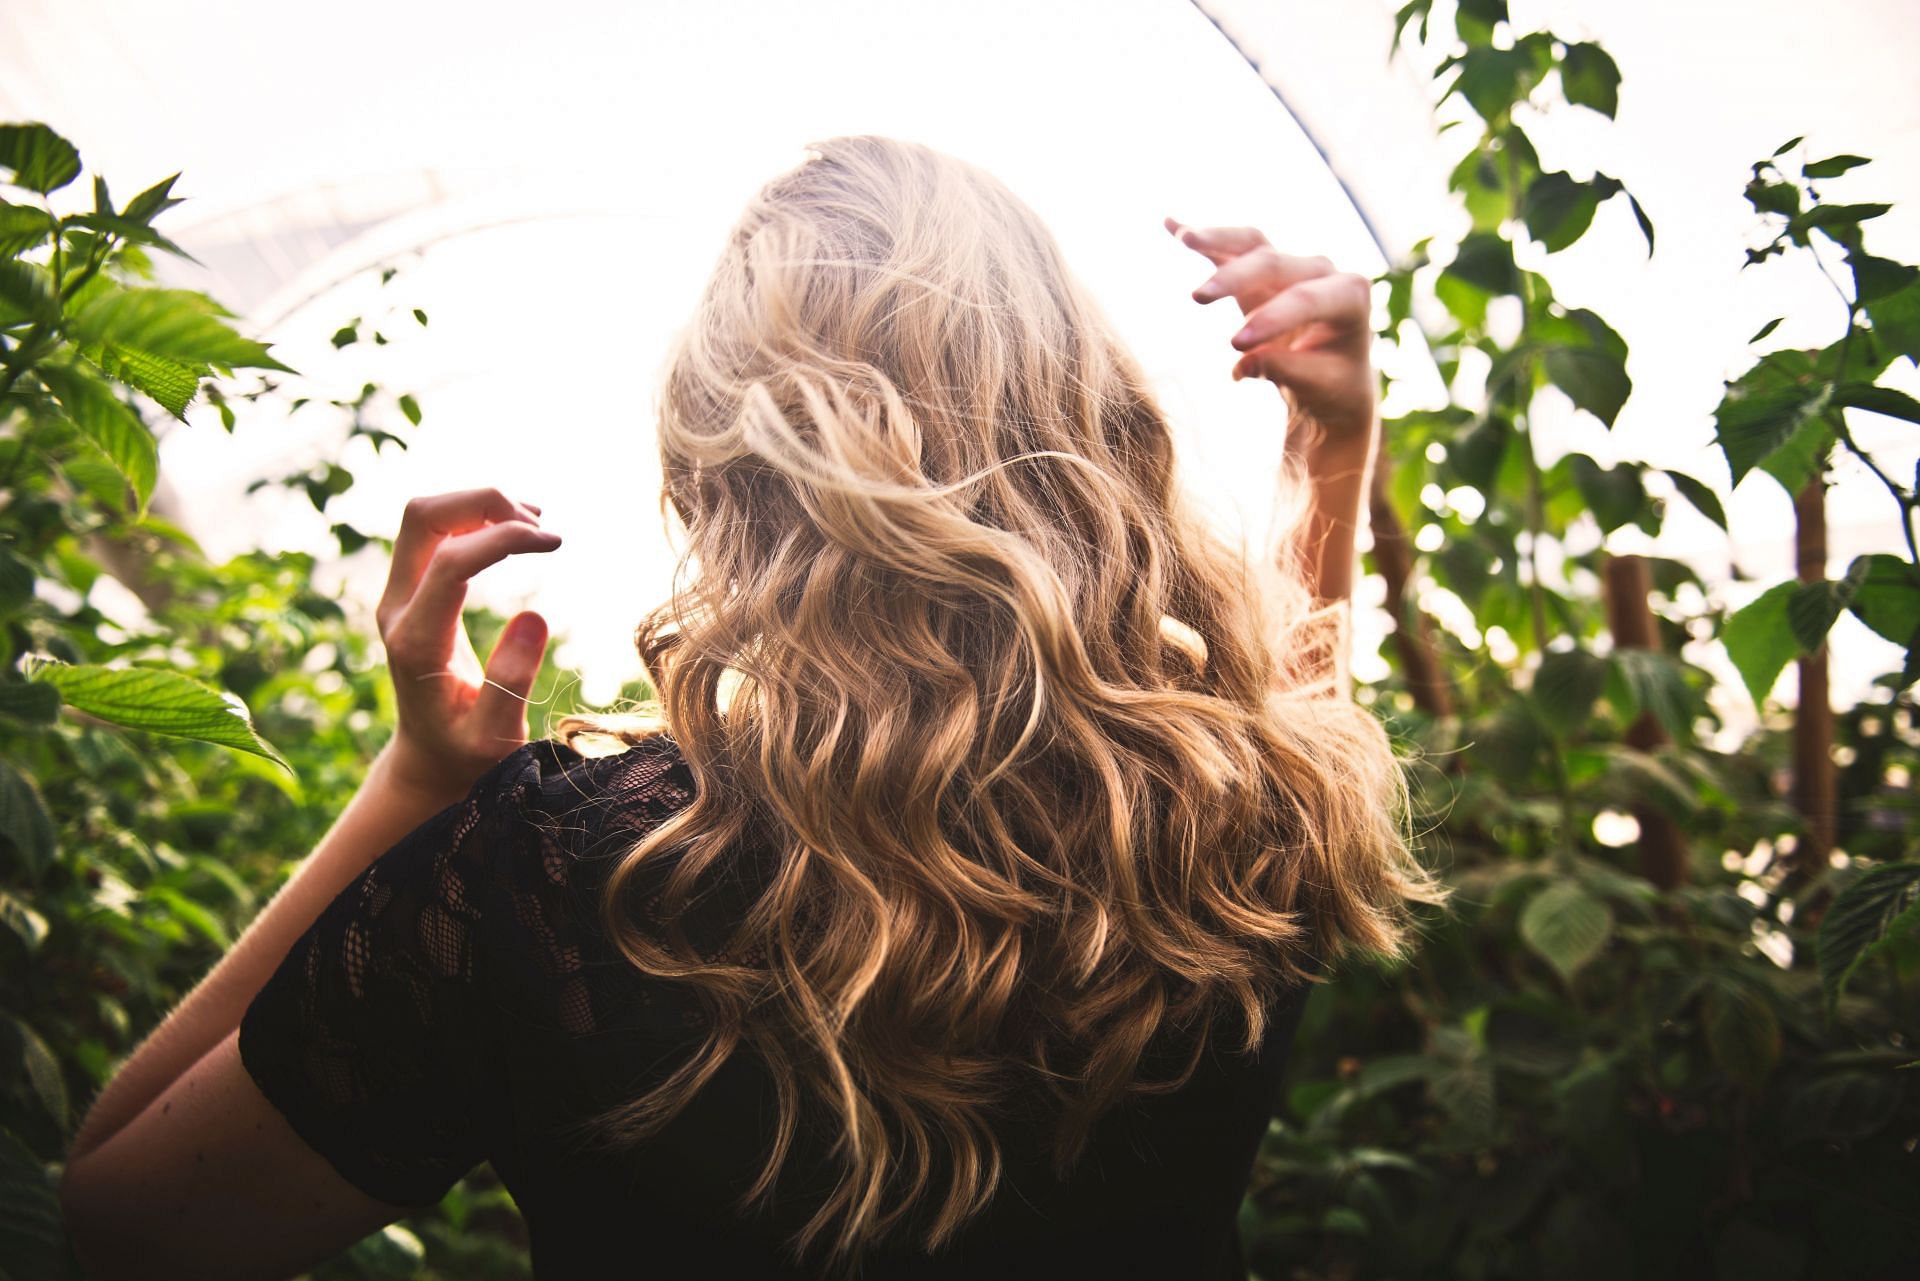 The hair on your head grows about 6 inches a year, or half an inch a month, on average (Image via Pexels @Tim Mossholder)